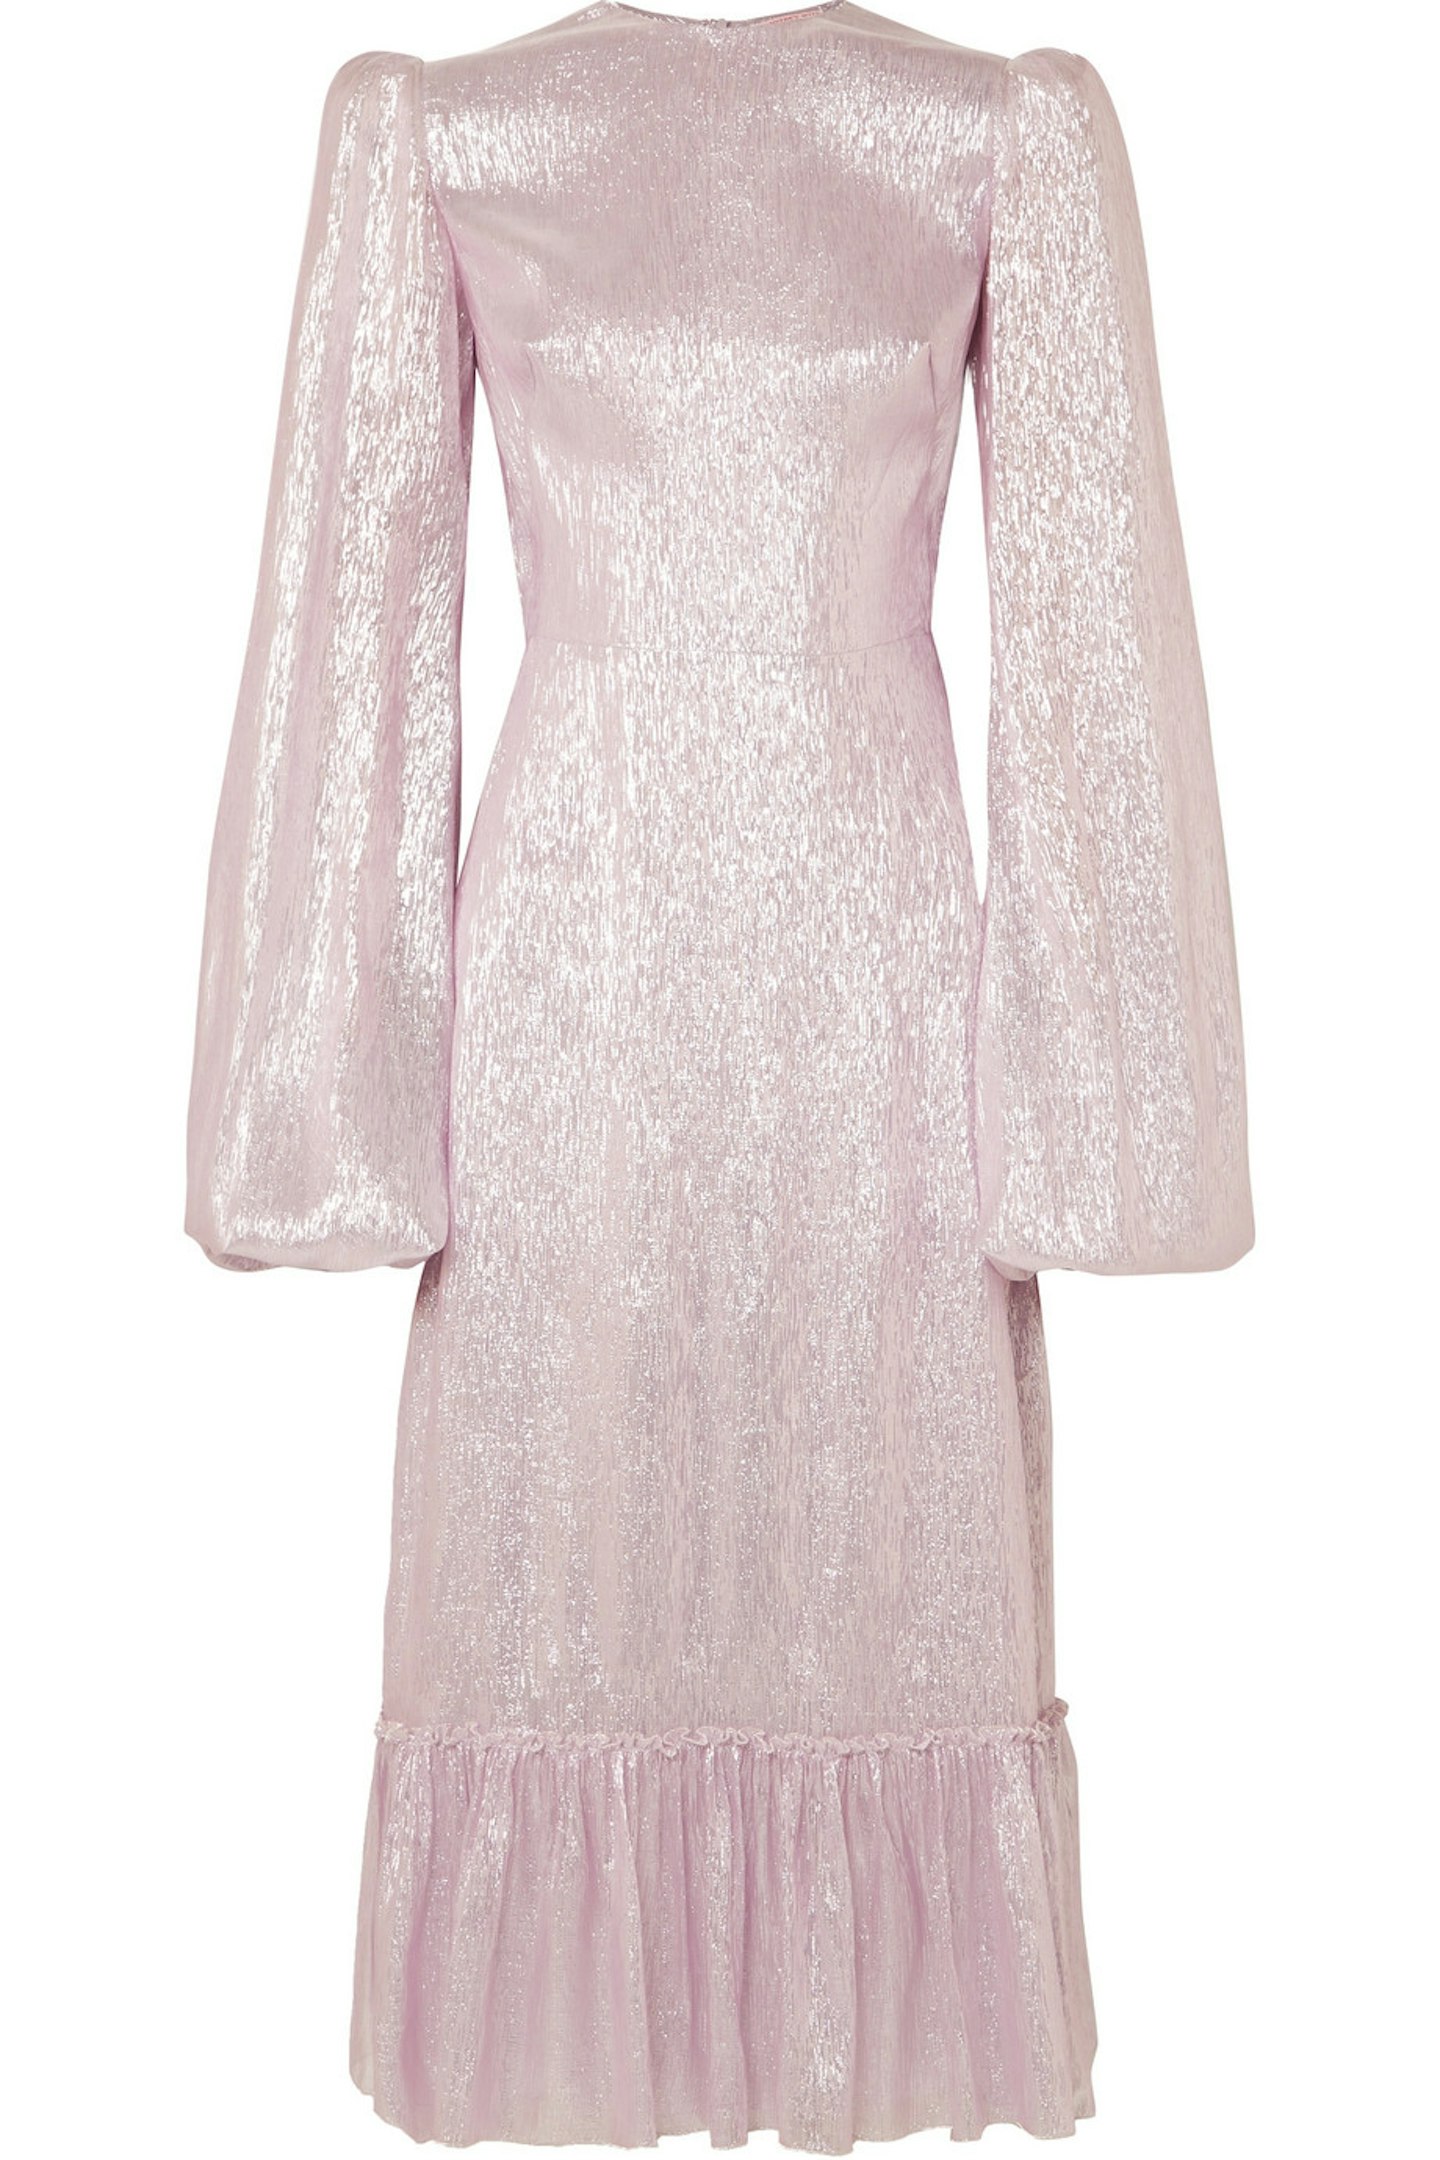 Pink Frosted Metallic Dress, £1895